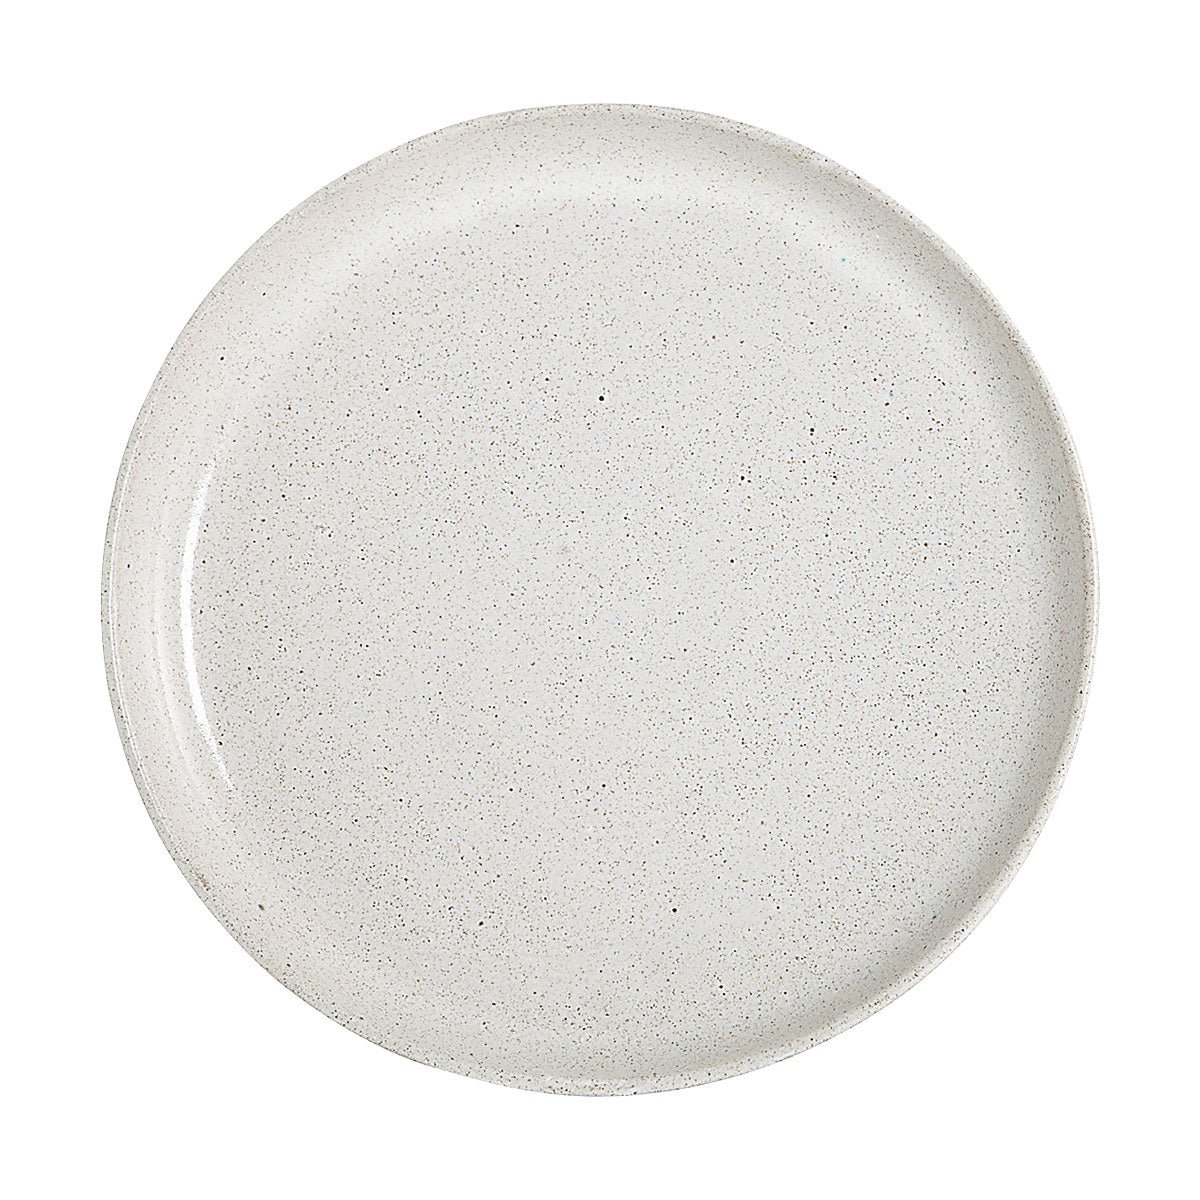 PLATE BY HAND - Ø 27.5CM